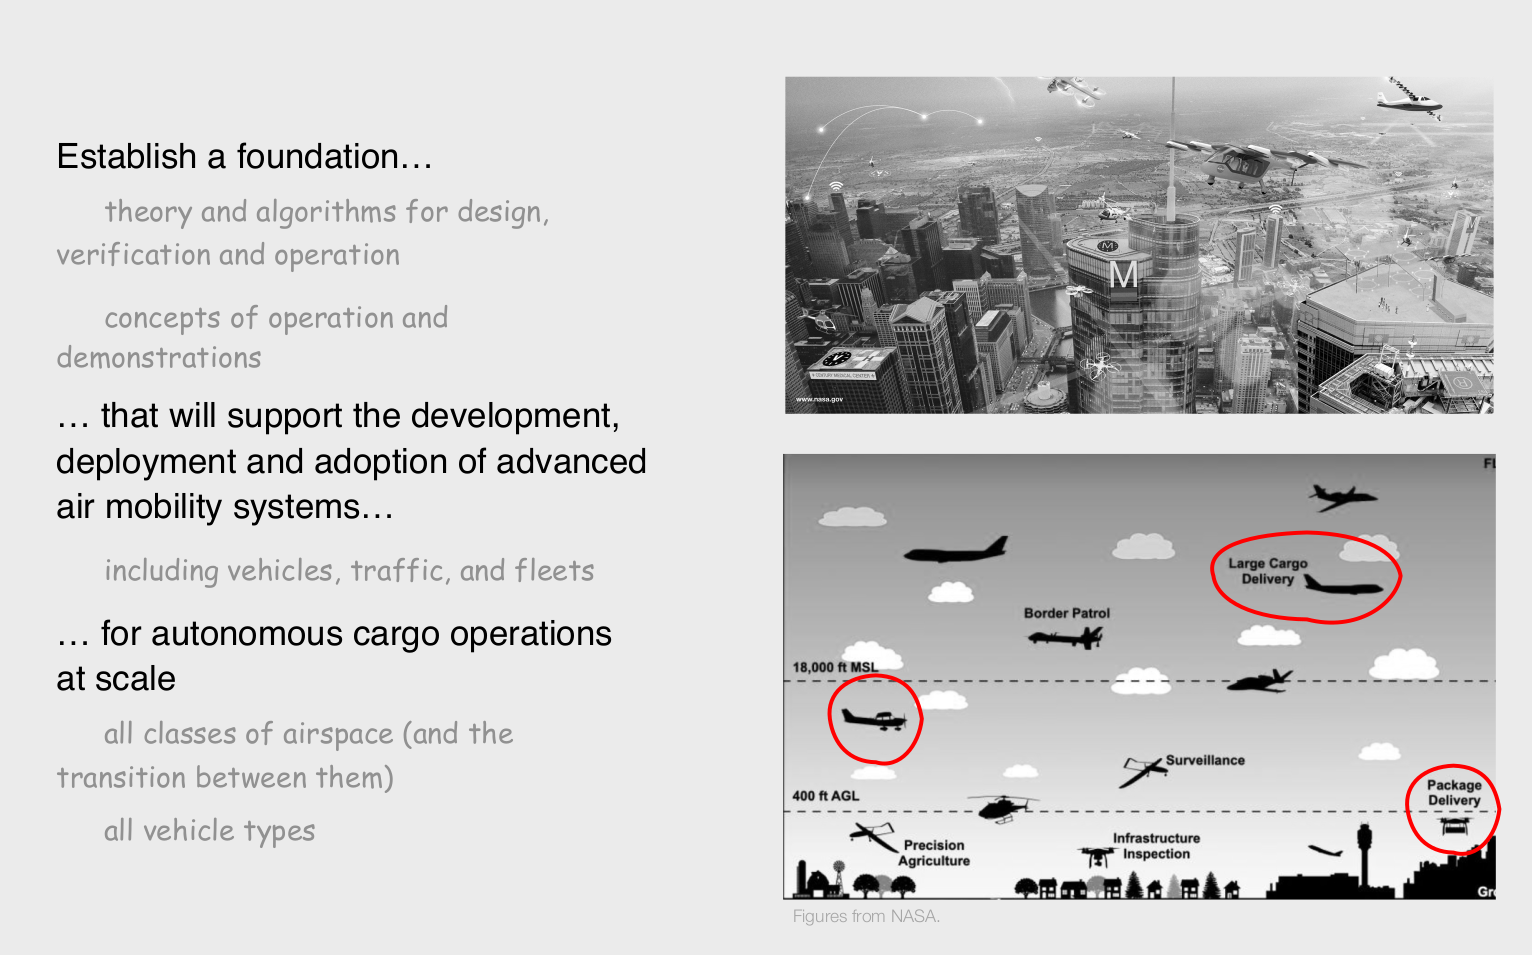 Autonomous Aerial Cargo Operations at Scale Objective